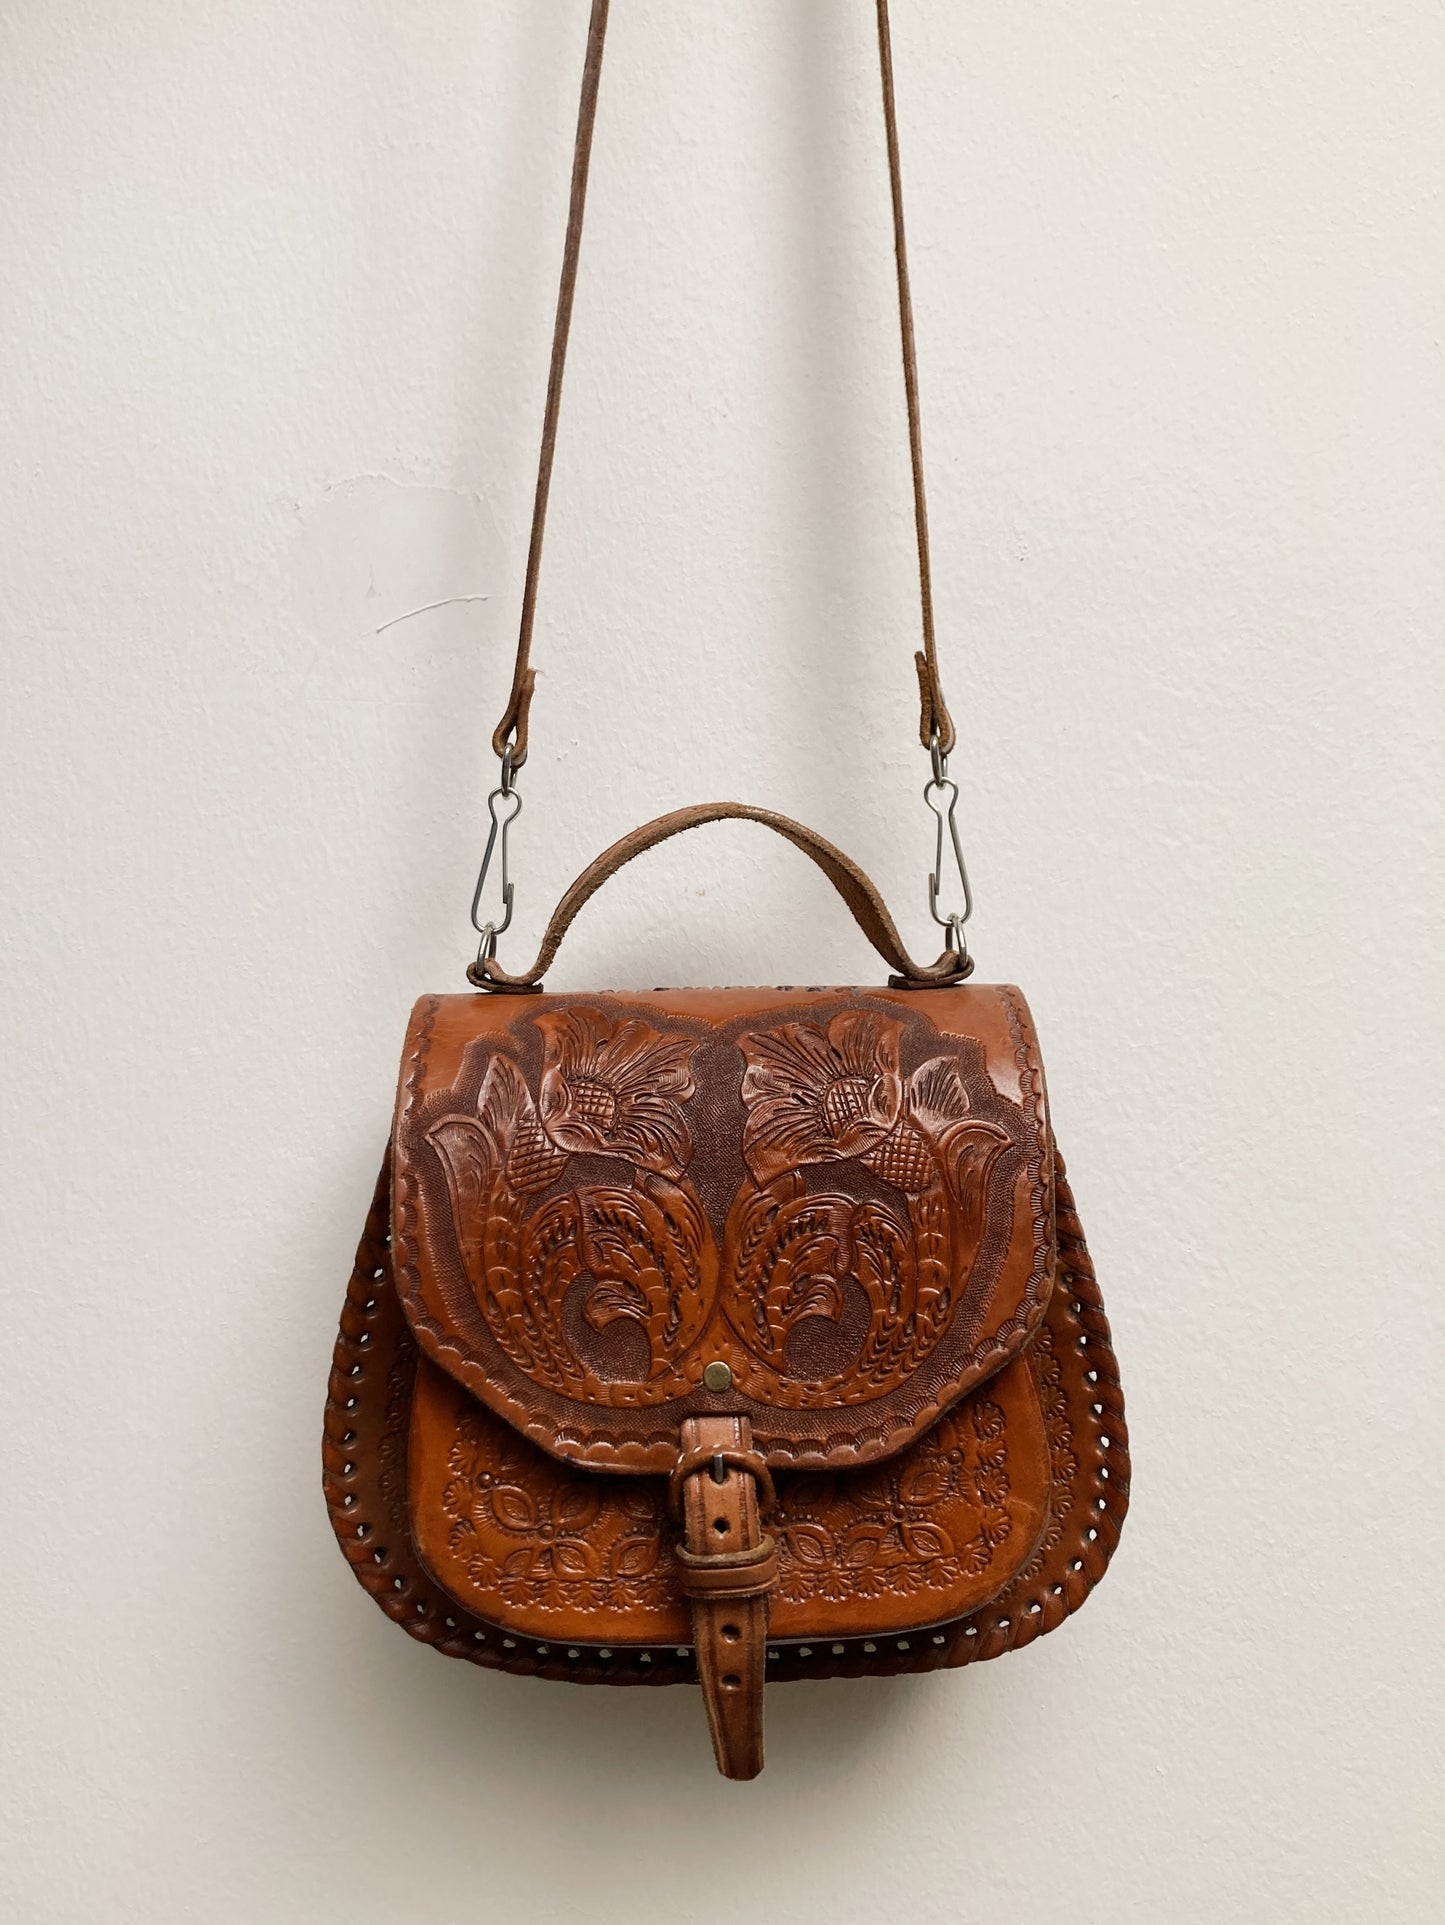 NEW IN! Leather bag